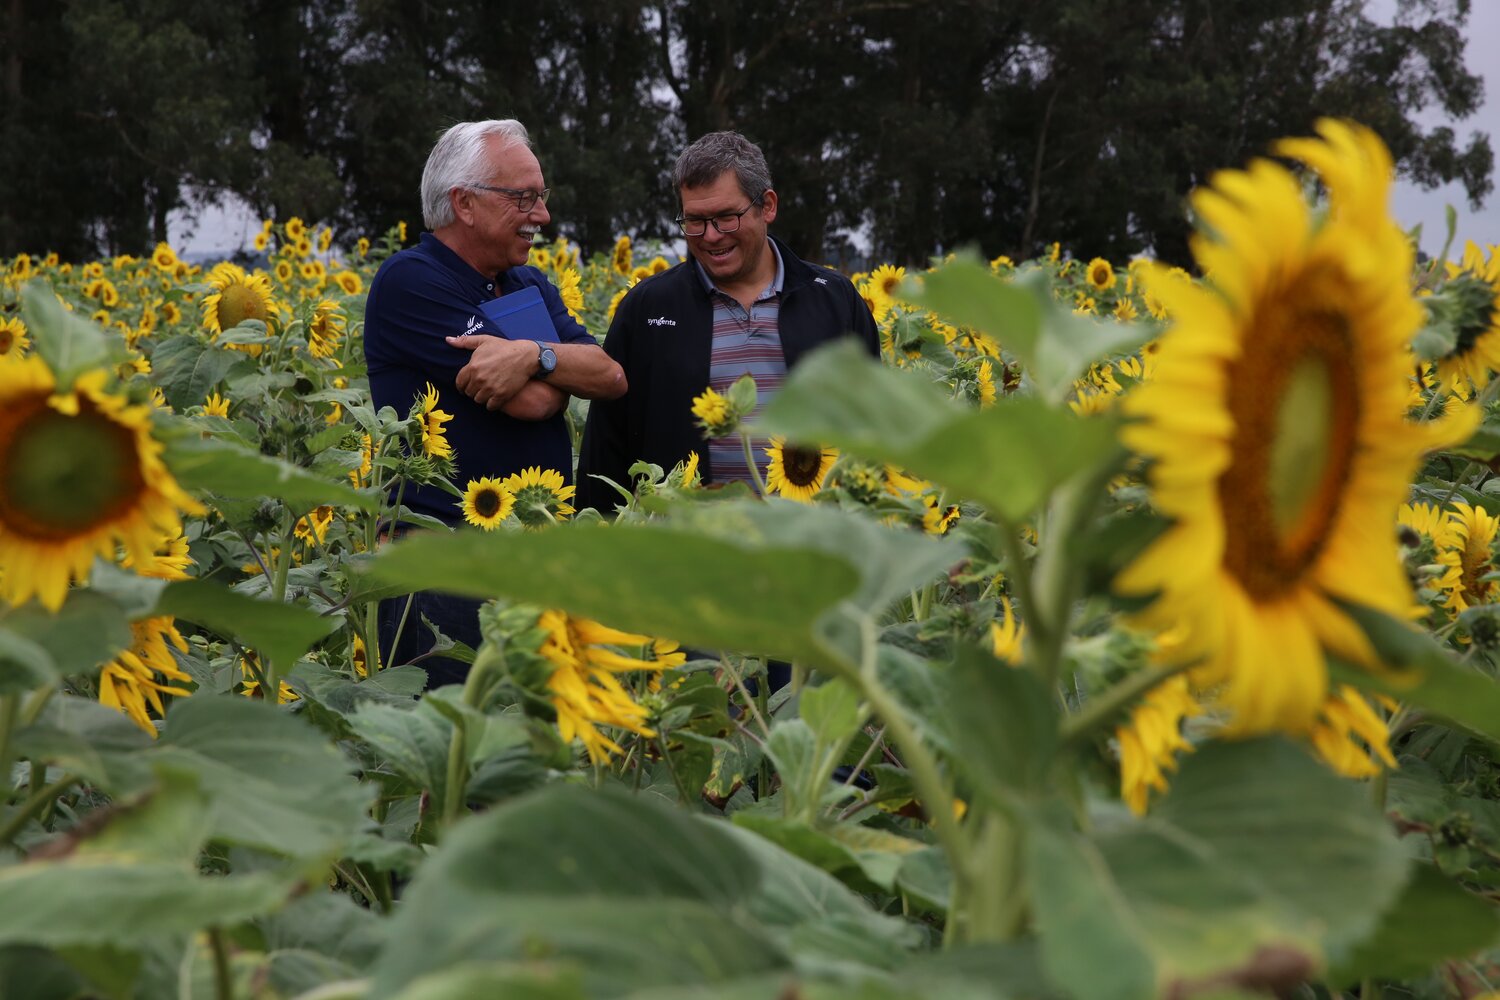 Day 2: Robert Reid (left), from Advanta Seeds, and Mariano Sposaro (right), from Syngenta, review the Crop Wild Relatives trial site at INTA’s Balcarce Experimental Station. Here, Norma Paniego and her colleagues are evaluating 222 pre-breeding lines for Verticillium resistance. Developing new, sturdier sunflower varieties is a challenge for both the public and private sector. As Robert Reid told us, “collaboration between the sectors is a must, if we are to really provide producers with new technologies that work.”